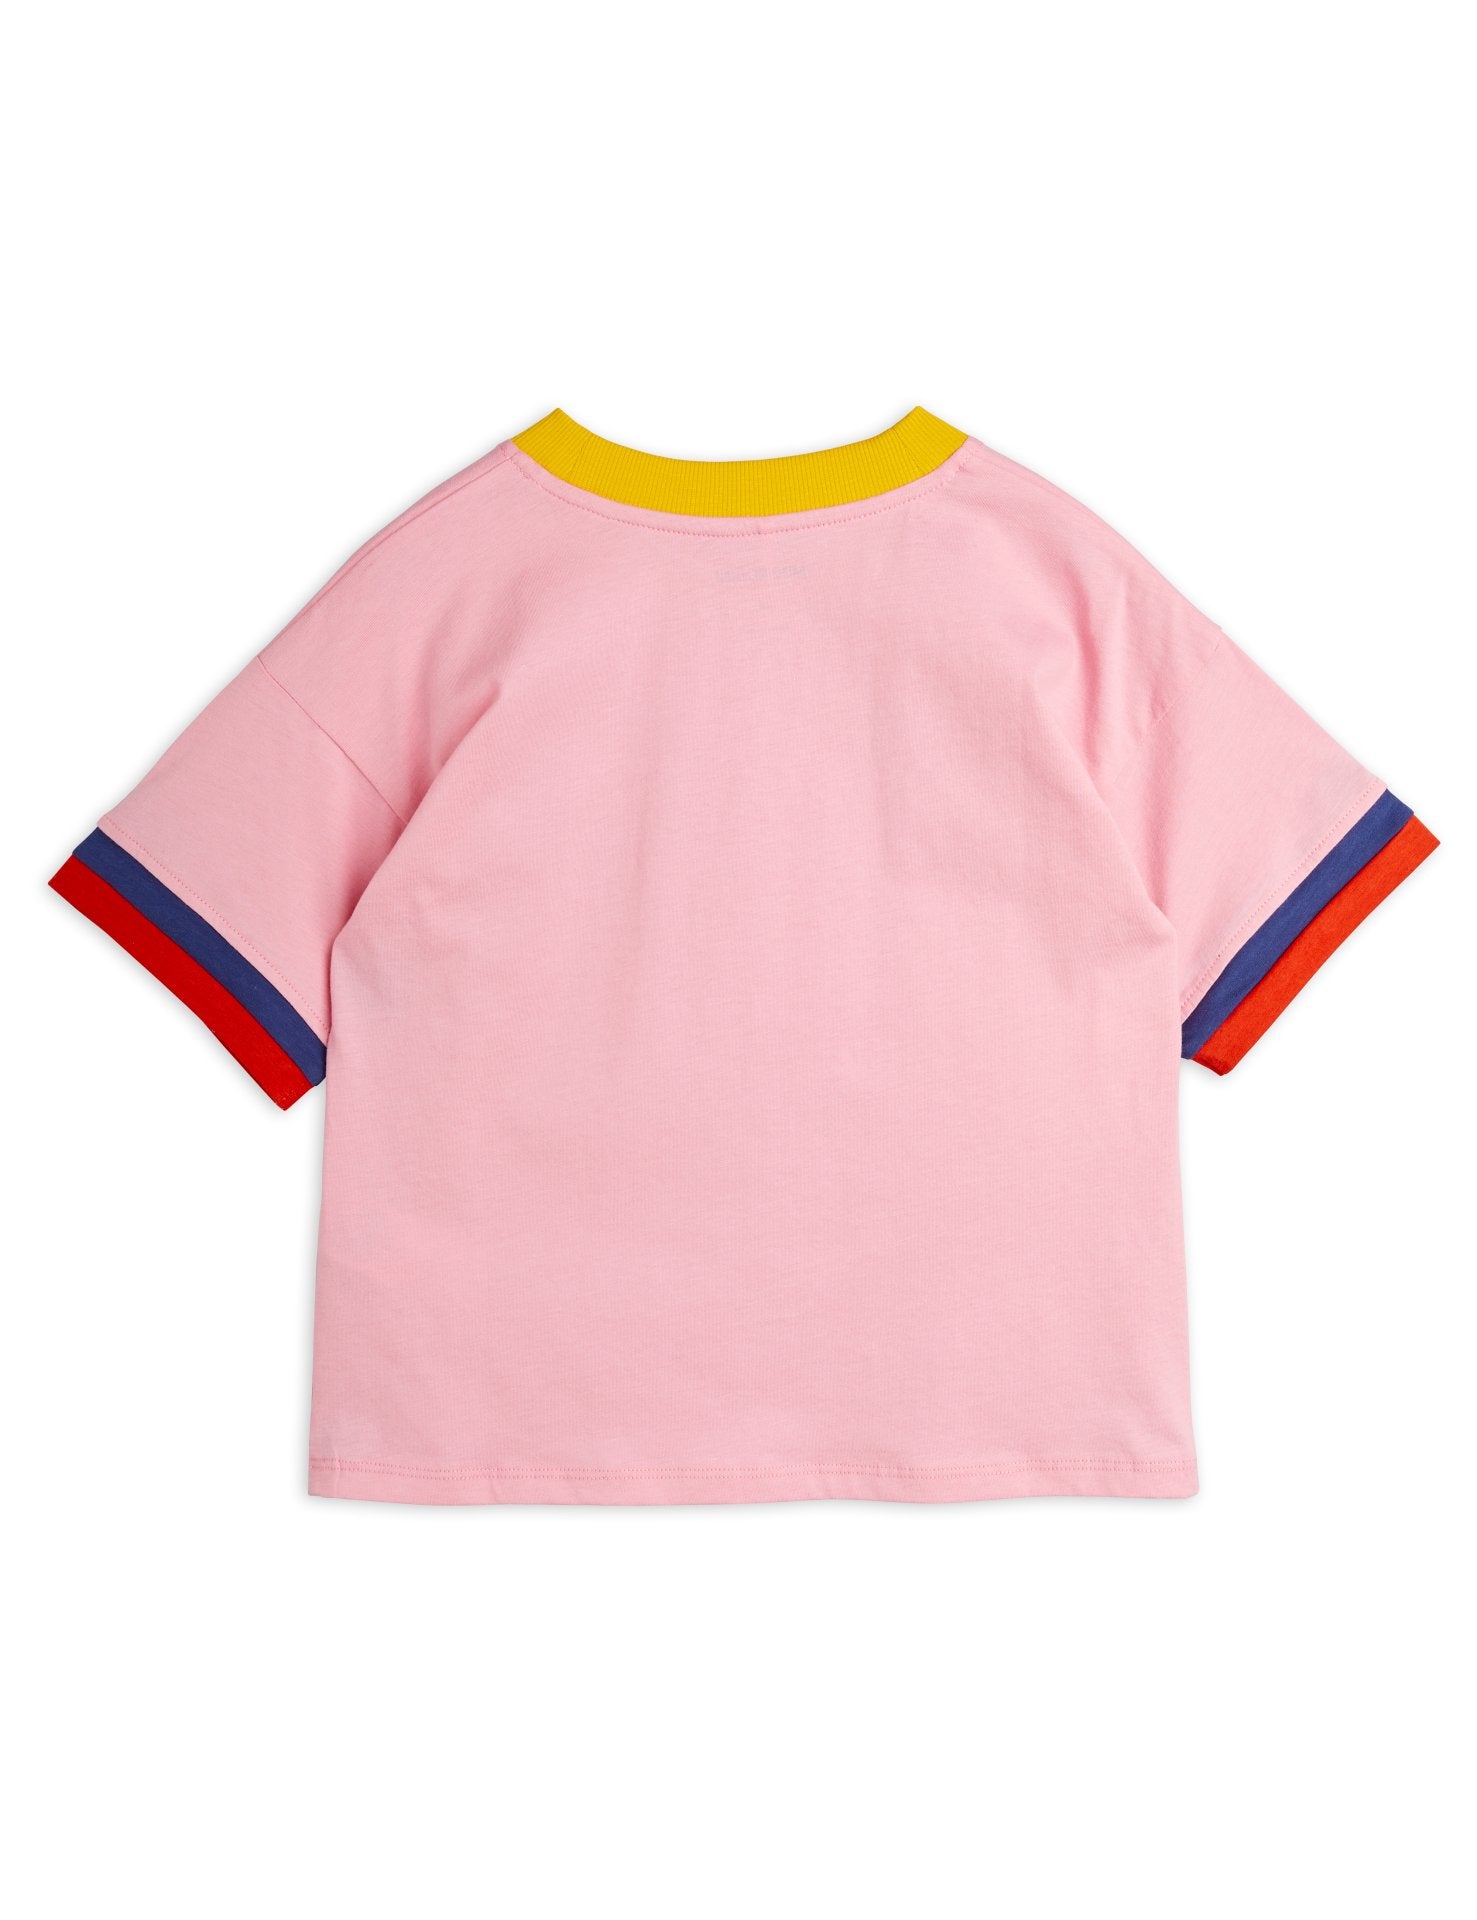 Super sporty sp ss tee